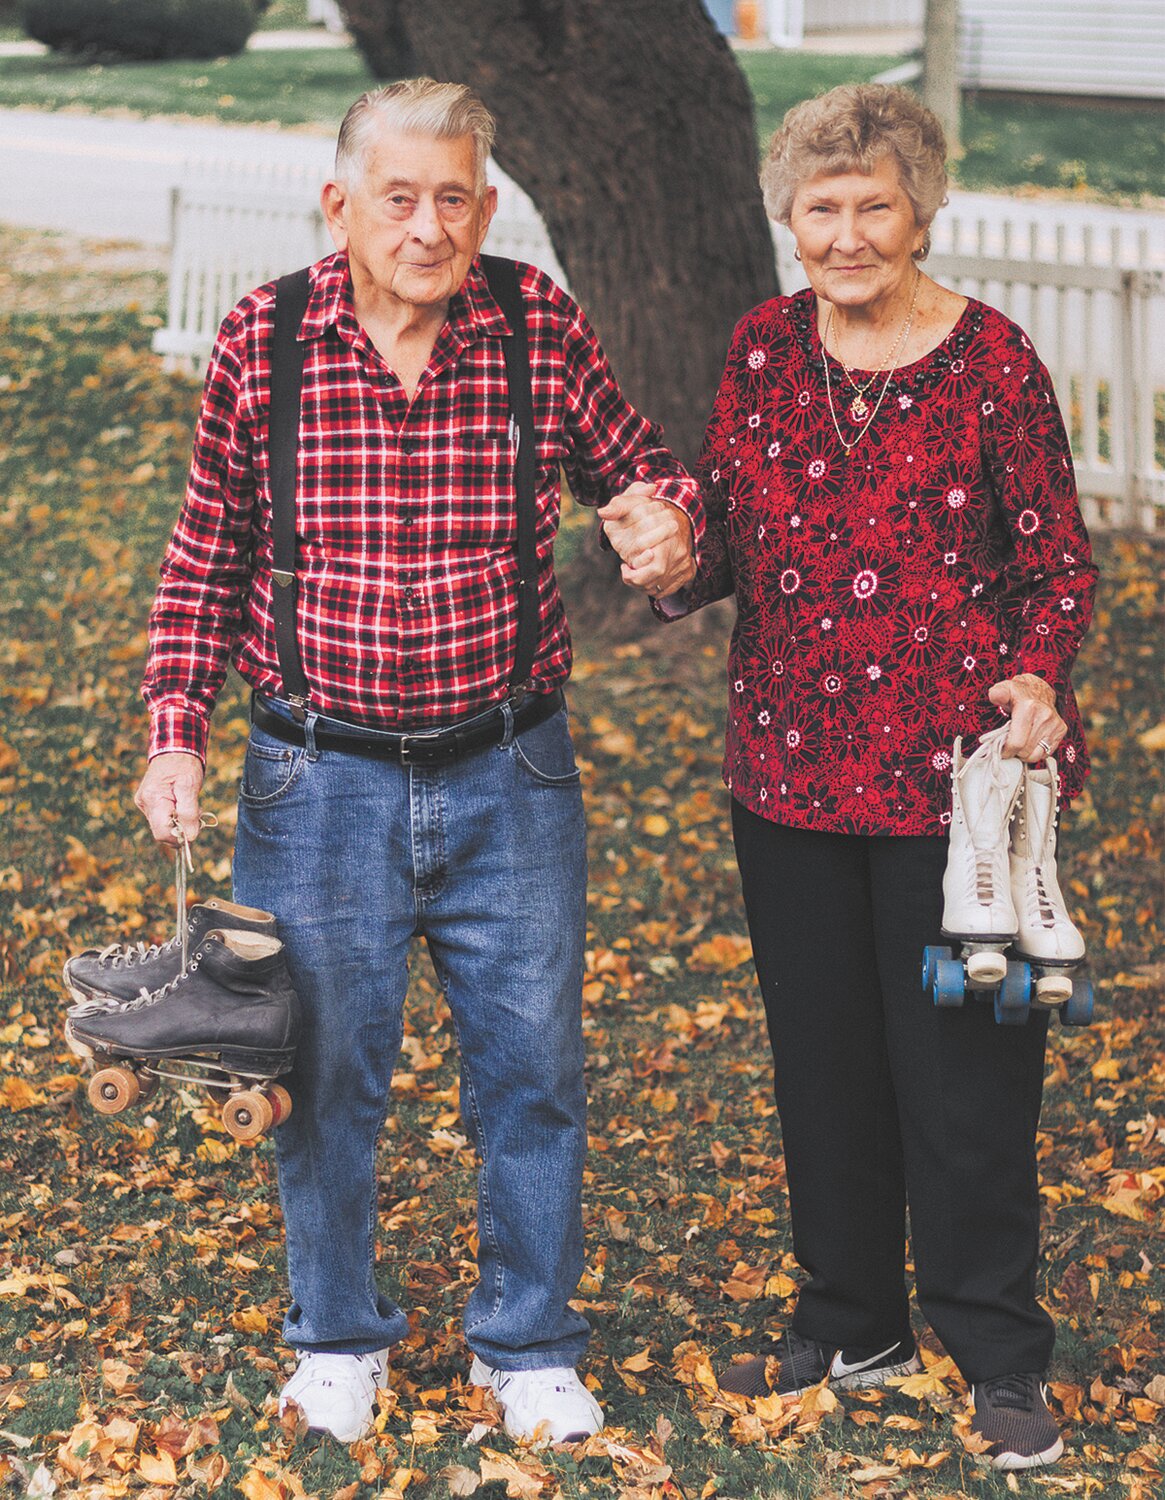 Russell and Bonnie Staton will celebrate their 75th wedding anniversary on Nov. 20.